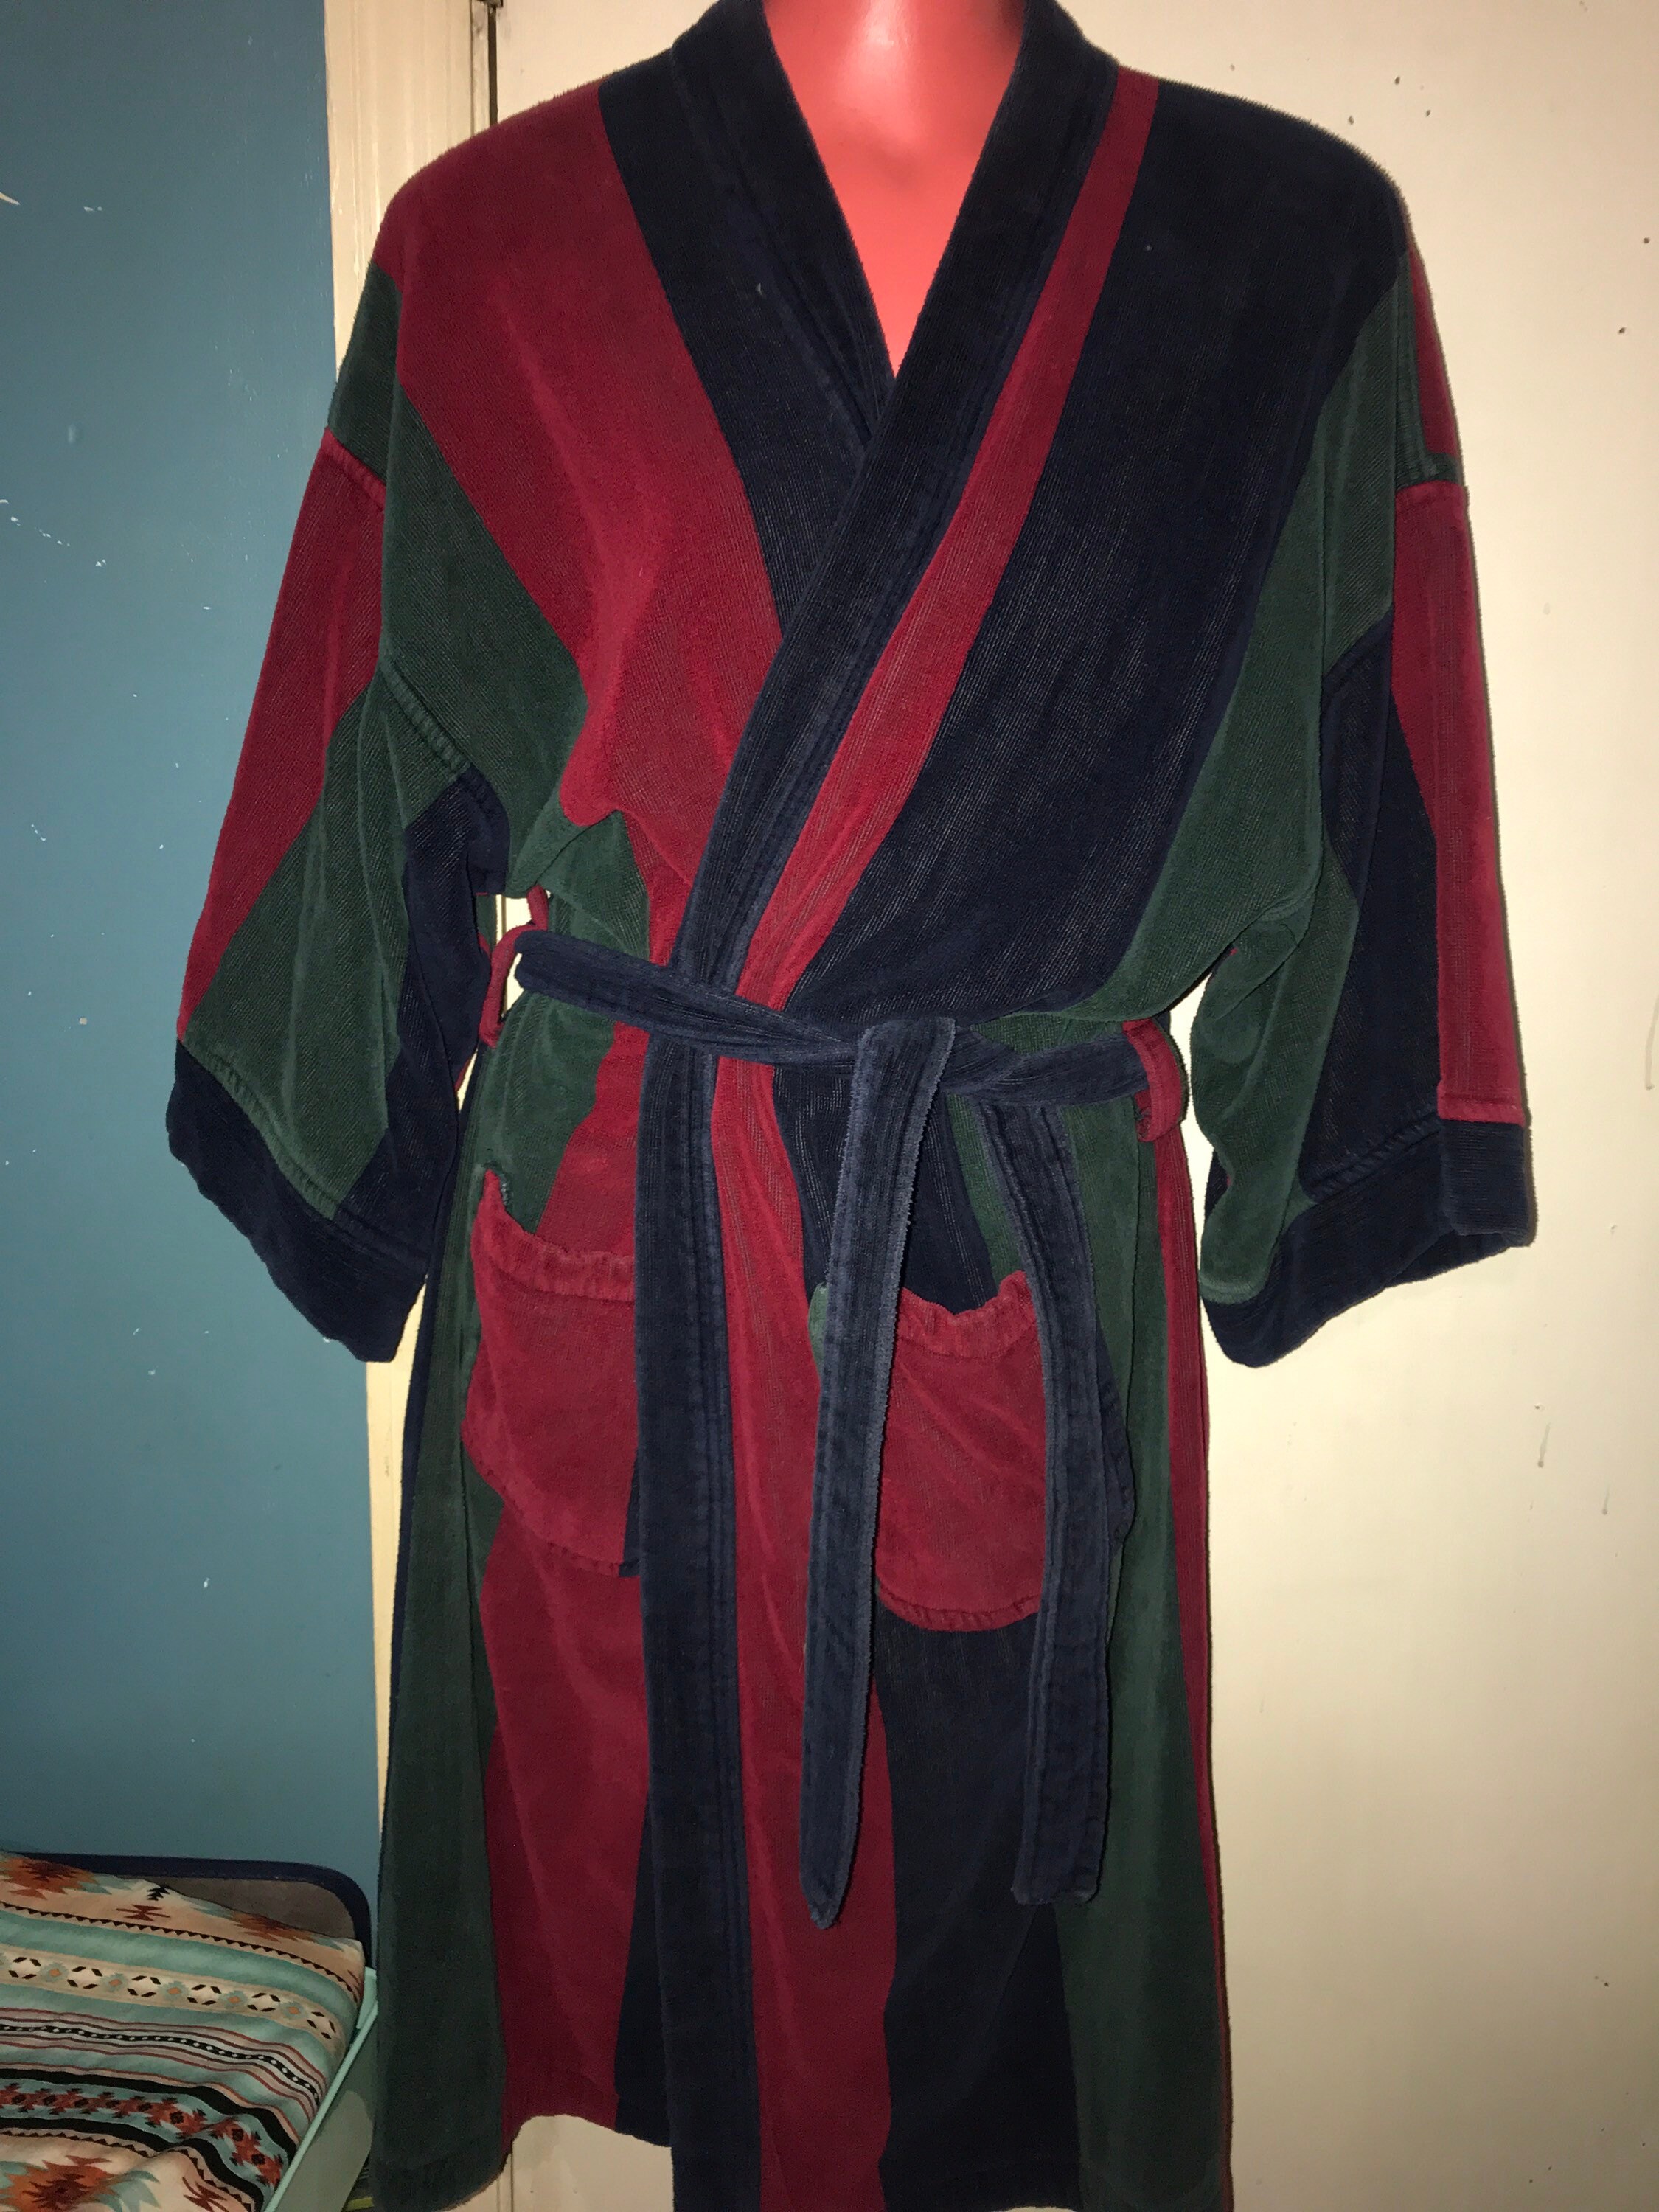 Vintage Terry Cloth Robe. Multi-Colored 90’s Terry Cloth Robe ...